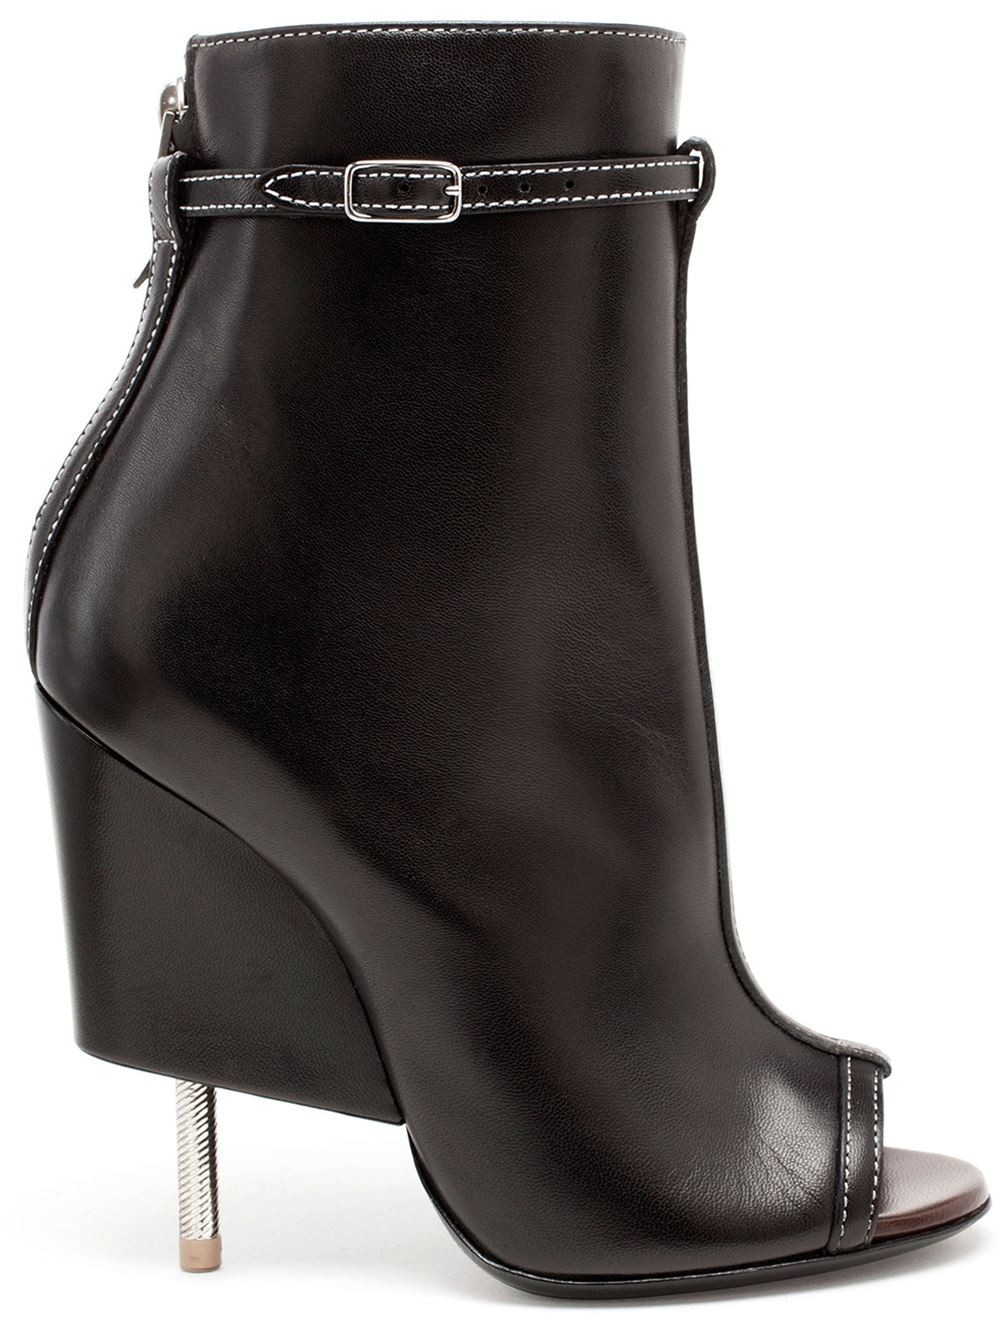 Givenchy Peep-toe Ankle Boots | ModeSens